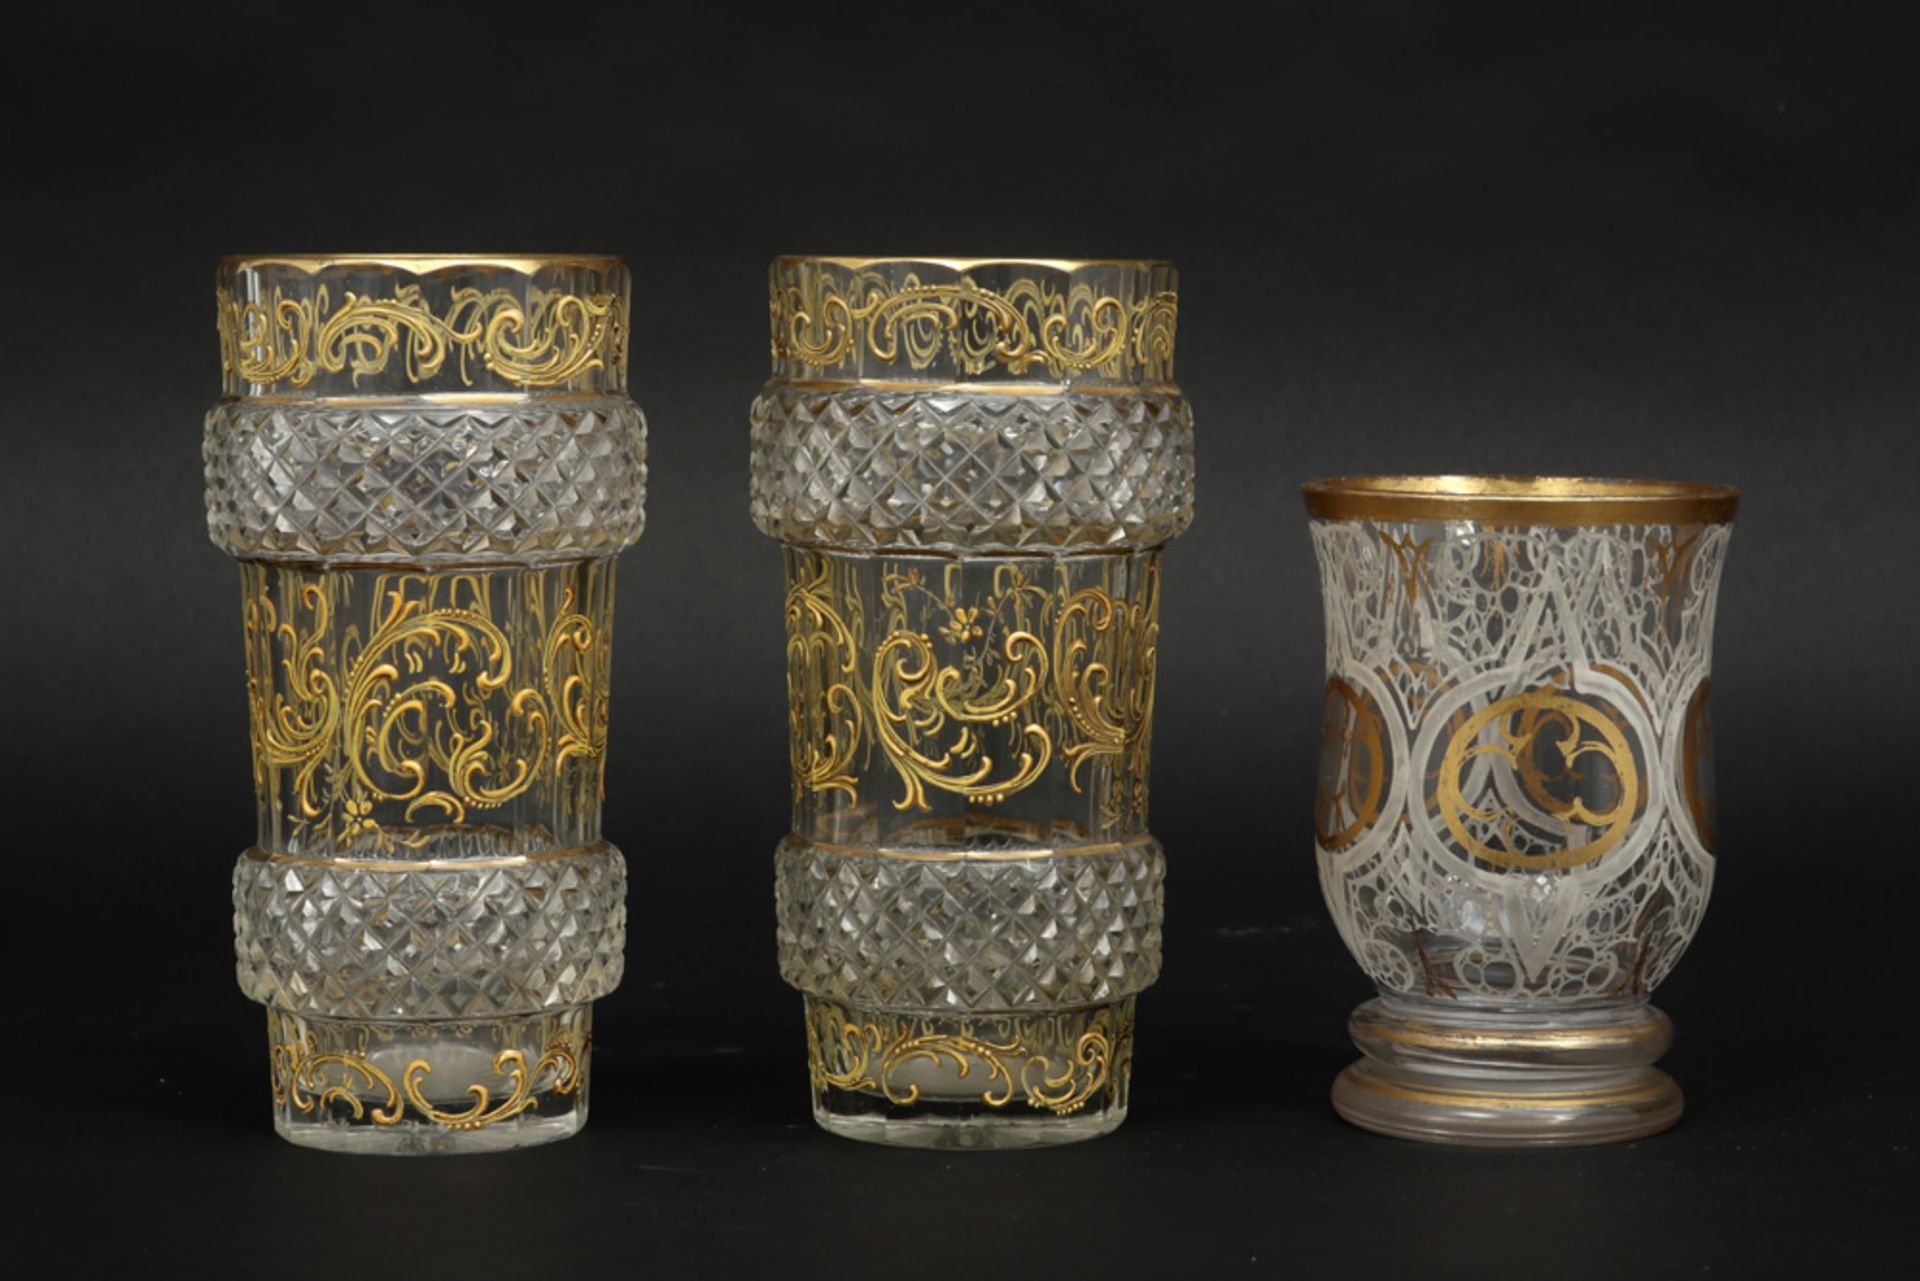 an antique glass and a pair of antique Baccarat vases in crystal, each with a gold decor